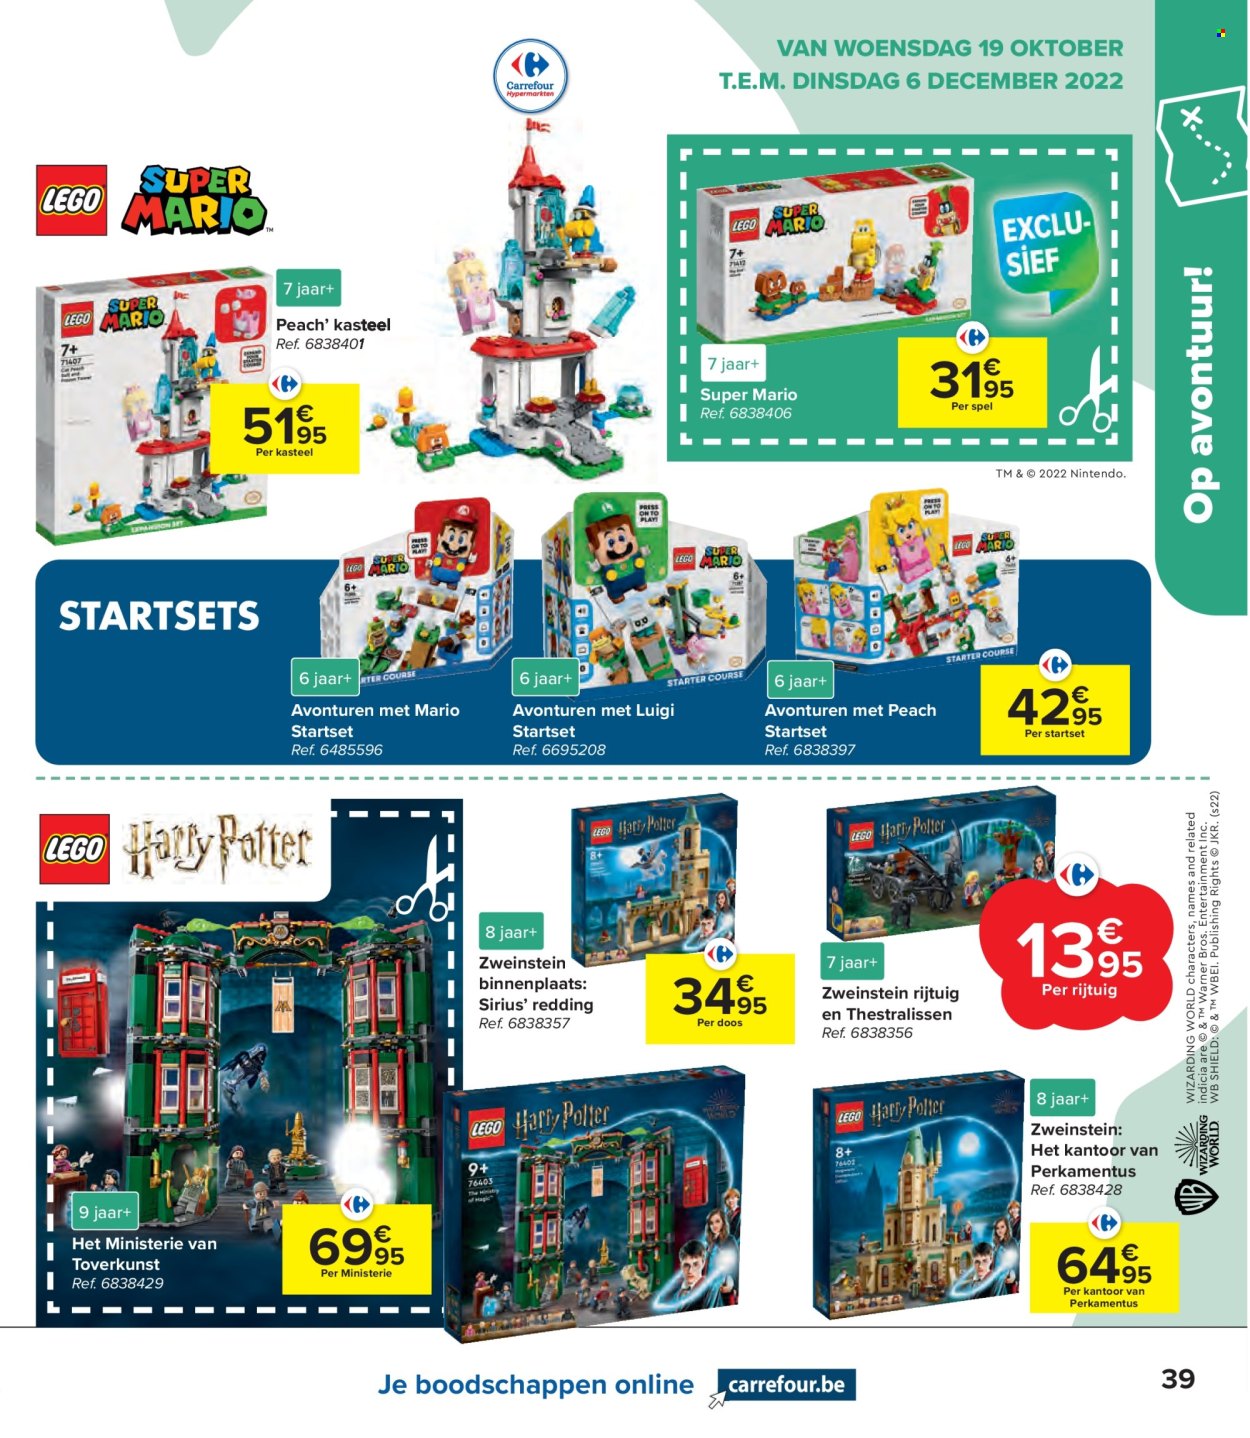 Catalogue Carrefour hypermarkt - 19.10.2022 - 6.12.2022. Page 39.